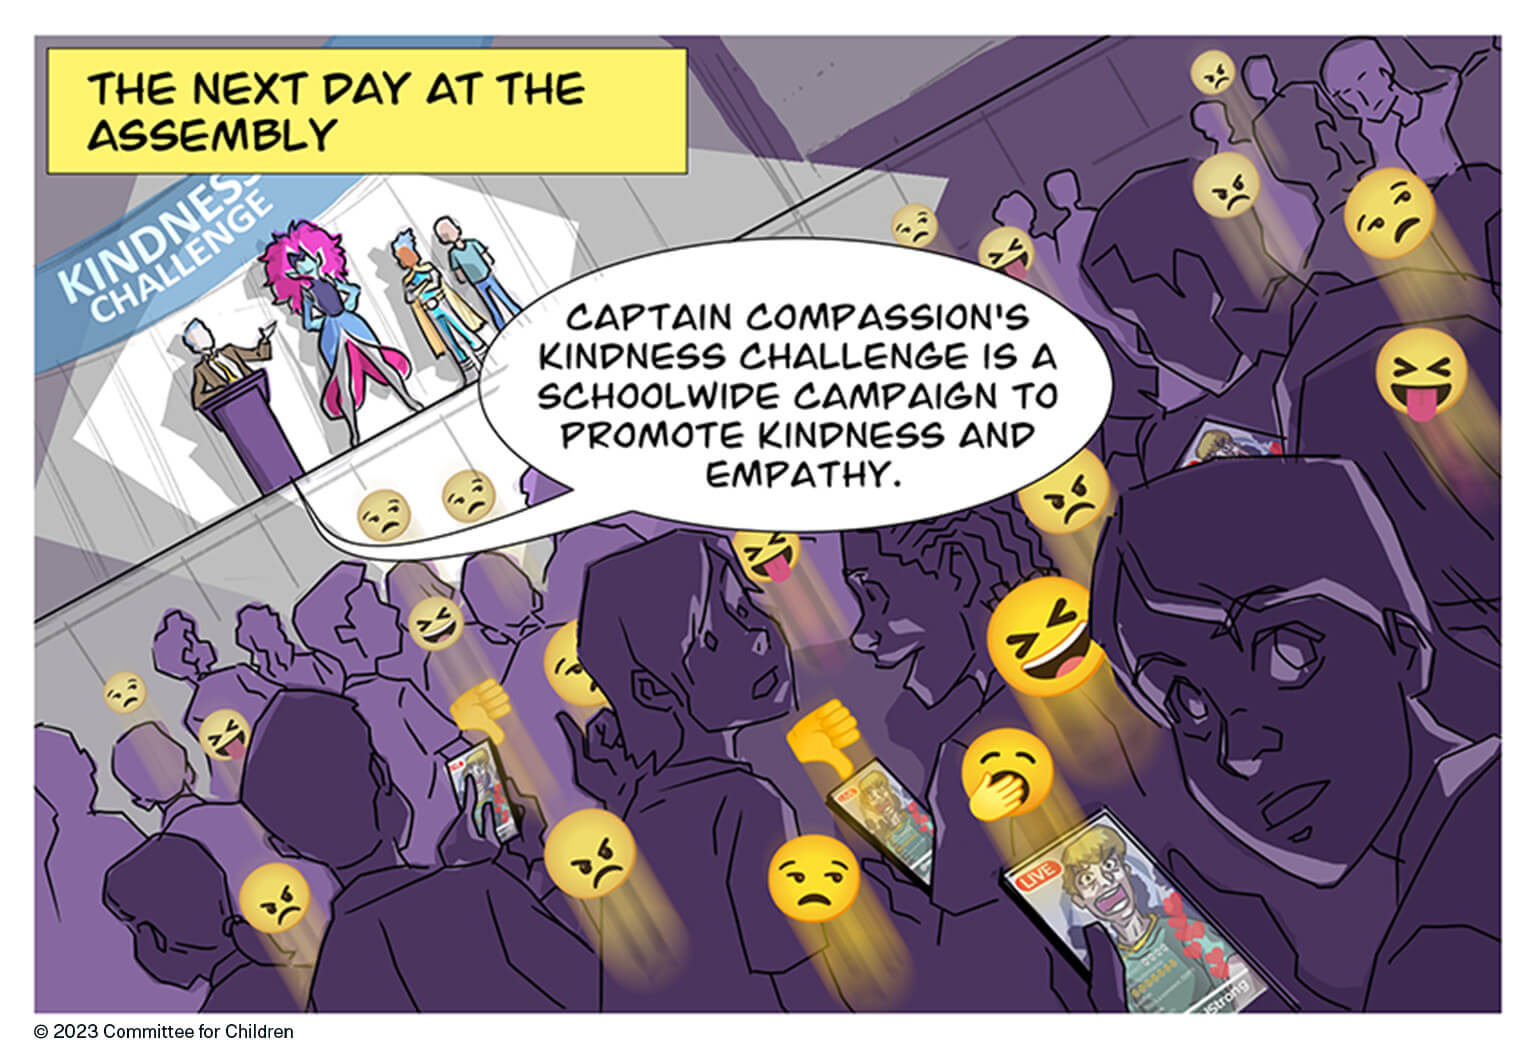 The next day, at a school assembly, the principal is on stage with Captain Compassion in an auditorium. Students are in the audience in the dark, and their phone screens are lit up as they comment on social media about the assembly using angry, bored, and laughing emojis.